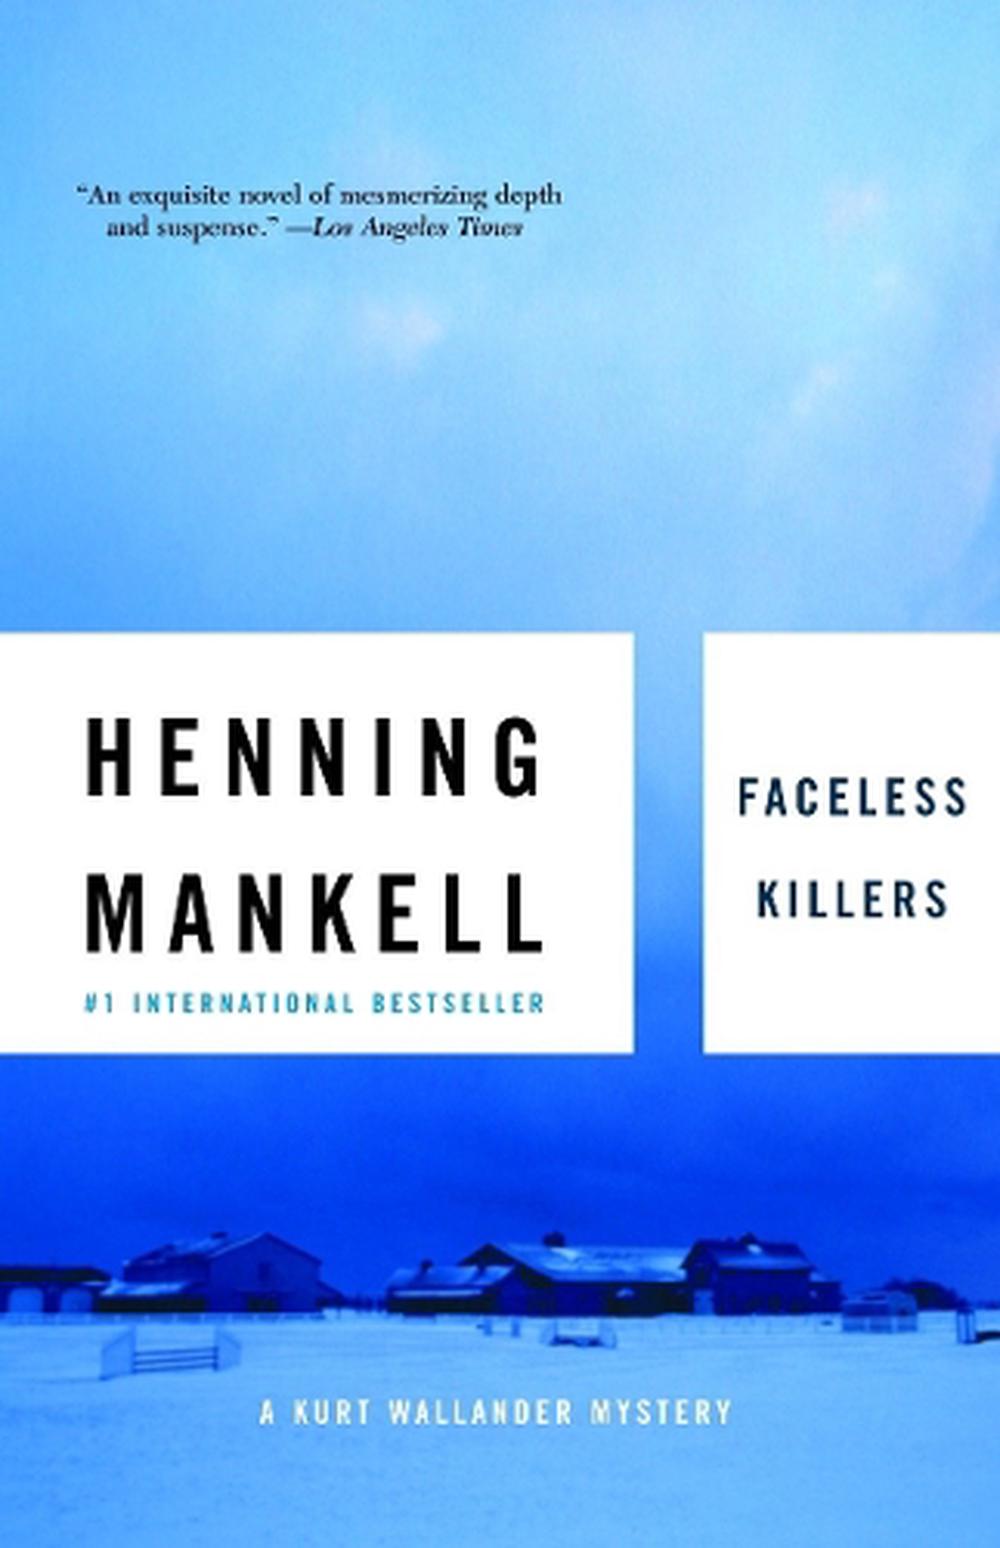 Faceless Killers by Henning Mankell (English) Paperback Book Free Shipping! 9781400031573 | eBay